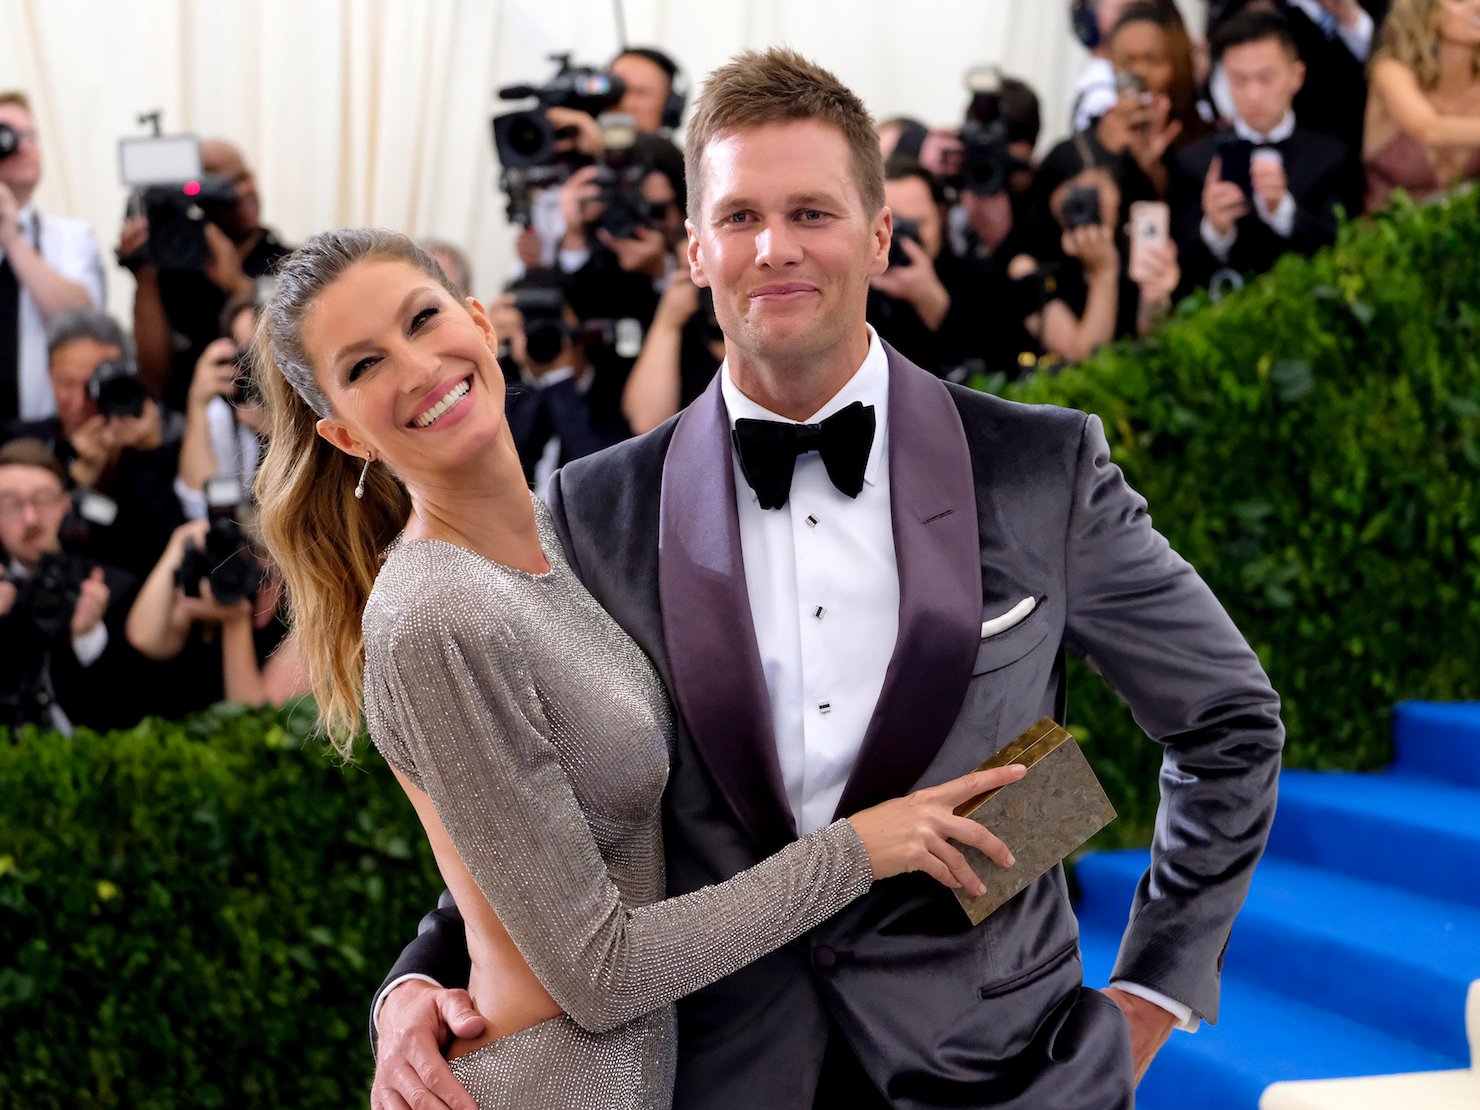 A Look Inside The Marriage Of Patriots Quarterback Tom Brady And Supermodel Gisele Bundchen Who 0698